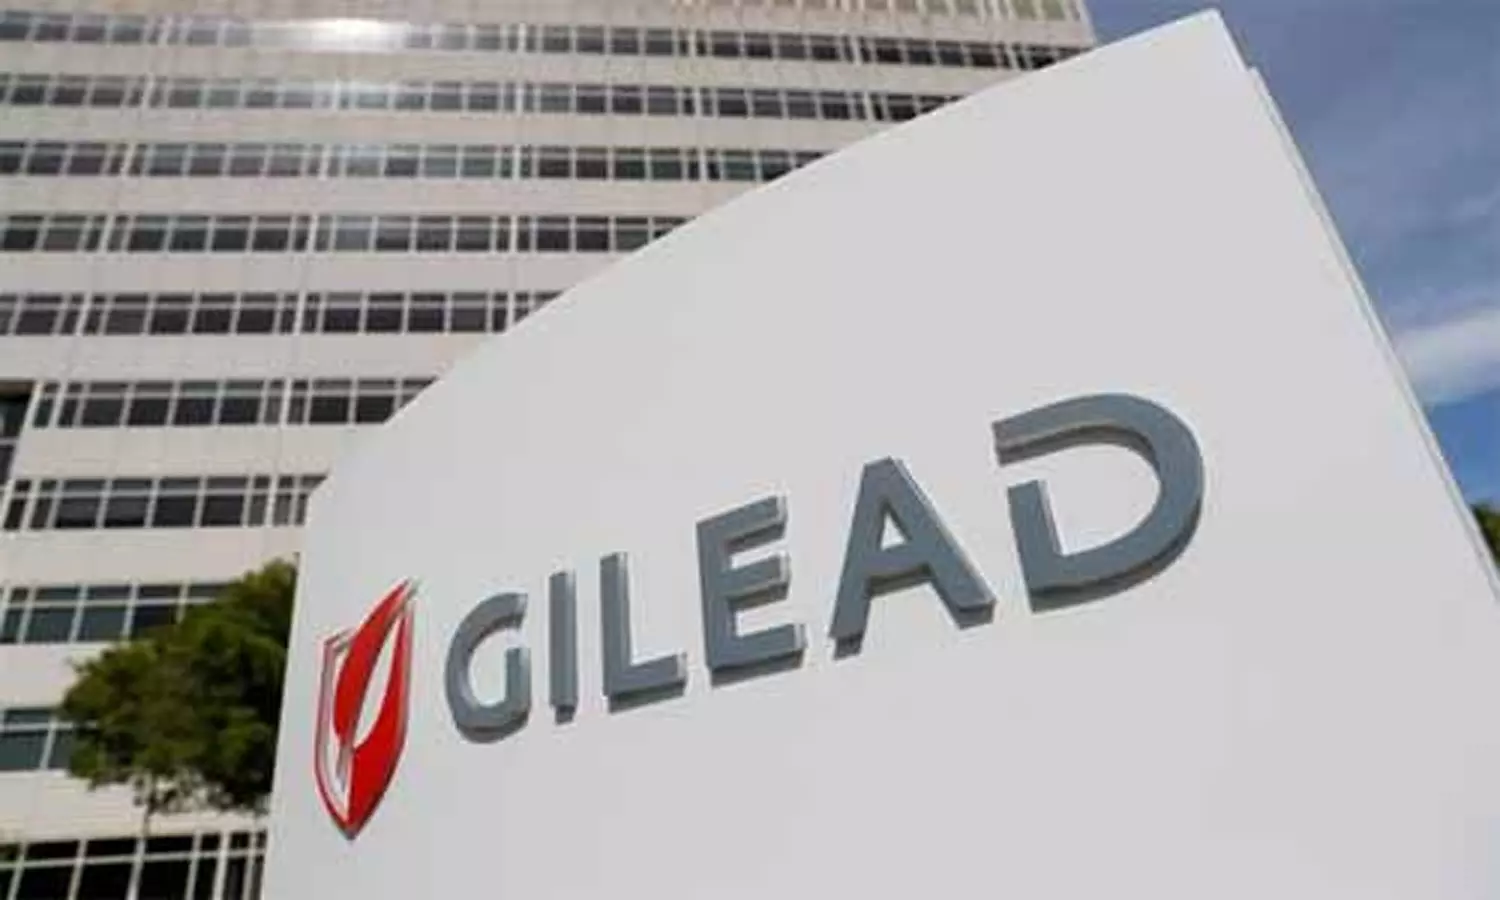 Gilead Sciences withdraws use of Zydelig for 2 types of cancer